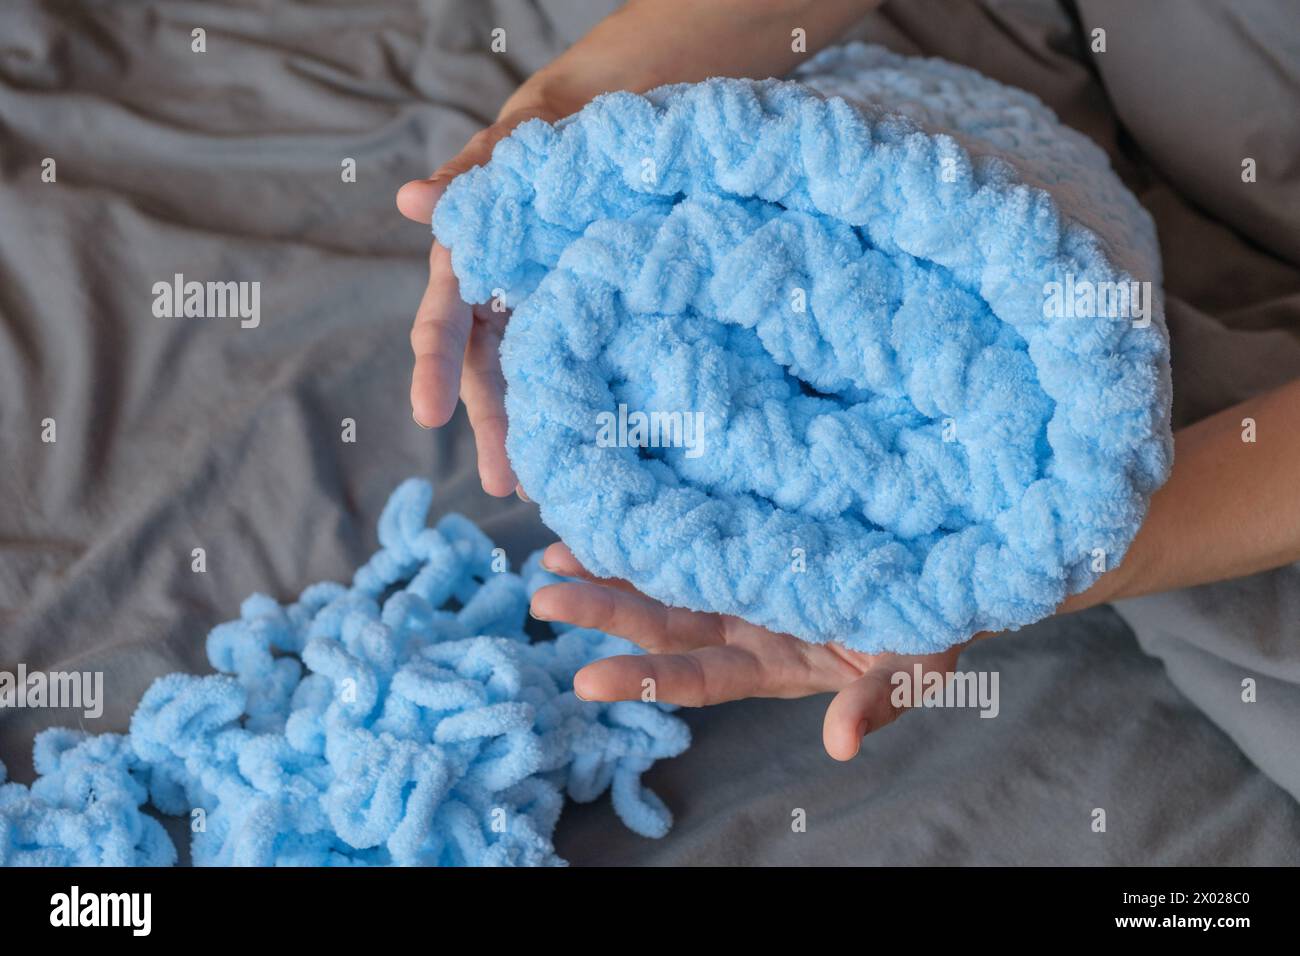 A woman lovingly crafts a blue blanket for her grandson with her own hands, each stitch a testament to her care and devotion. Create cherished memorie Stock Photo